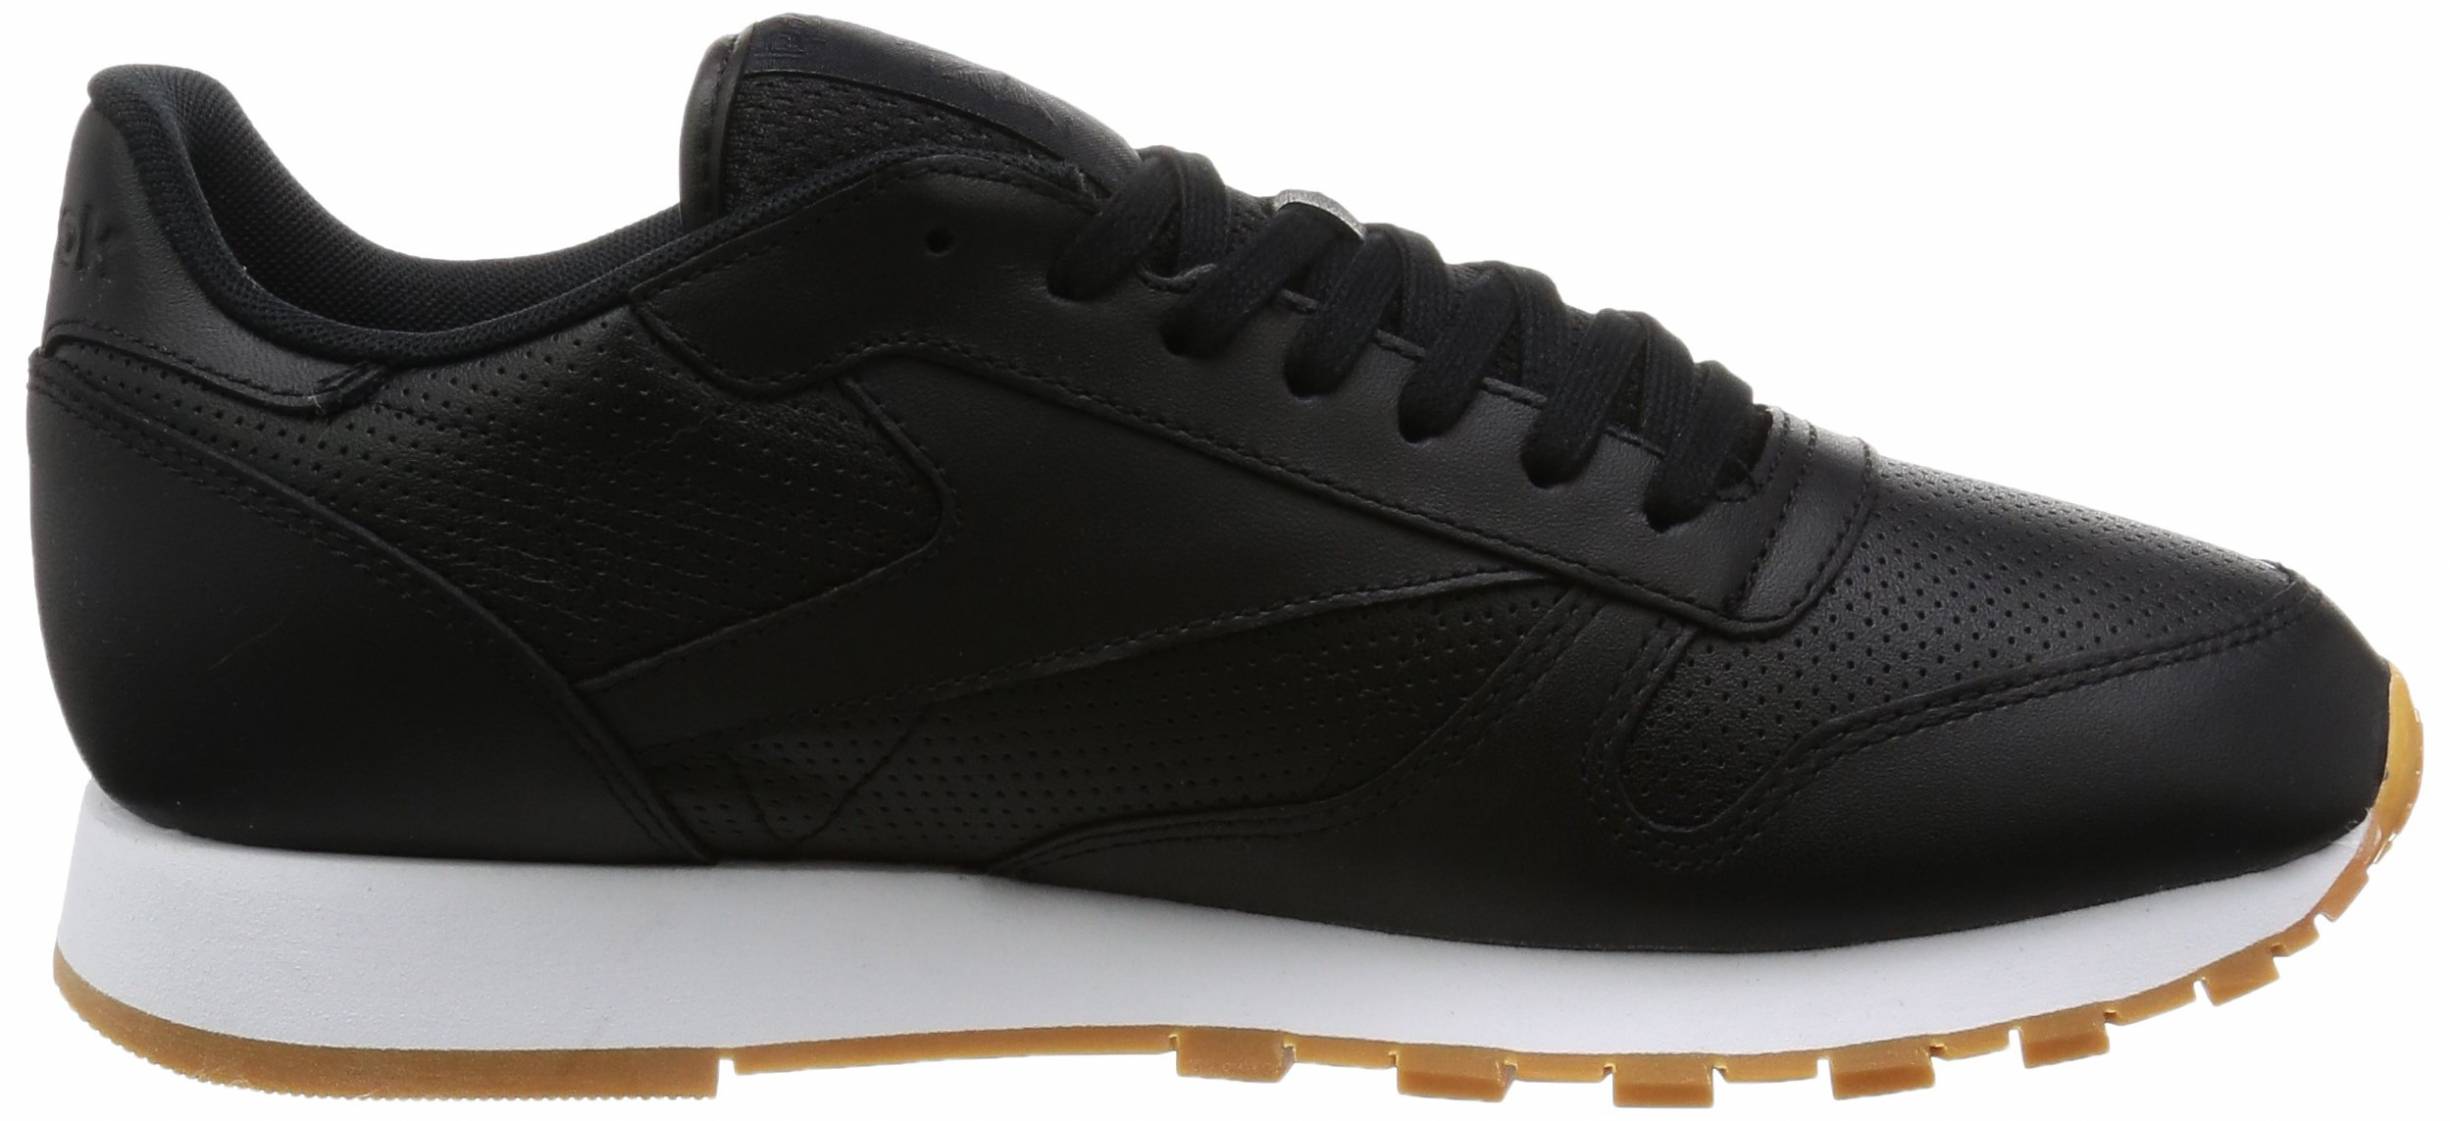 reebok classic leather shoes